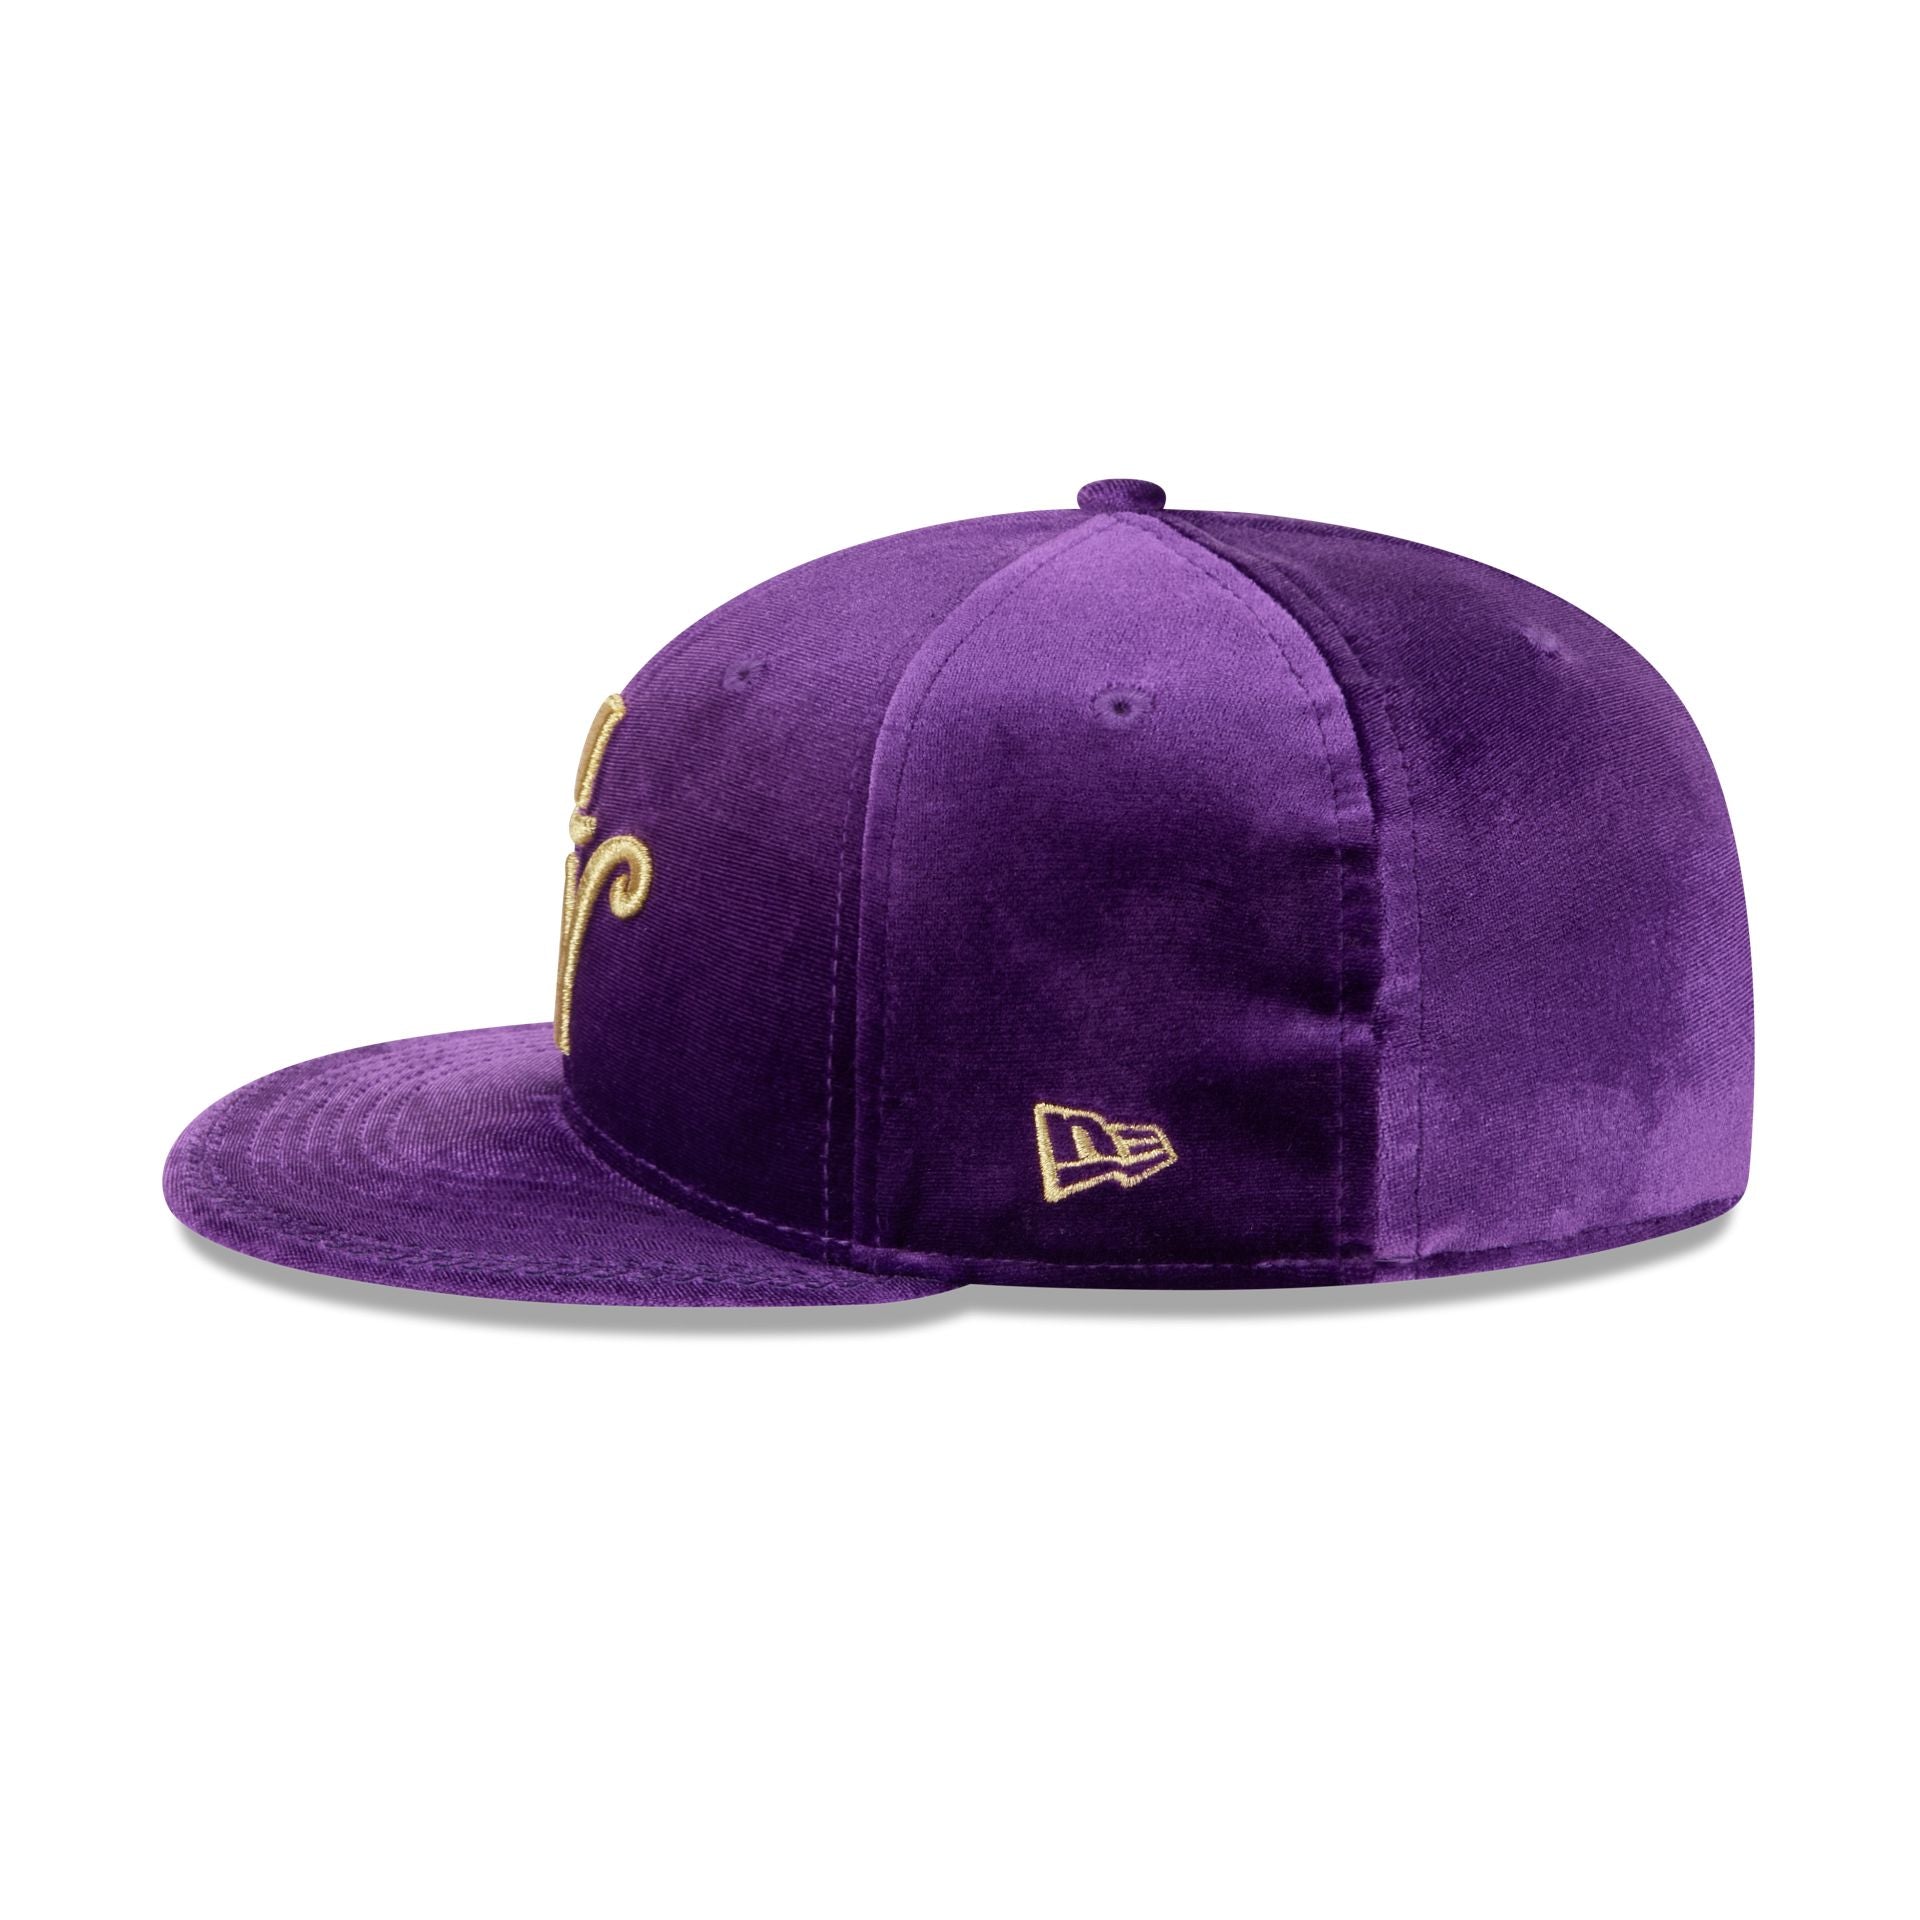 Willy Wonka Purple Velvet 59FIFTY Fitted